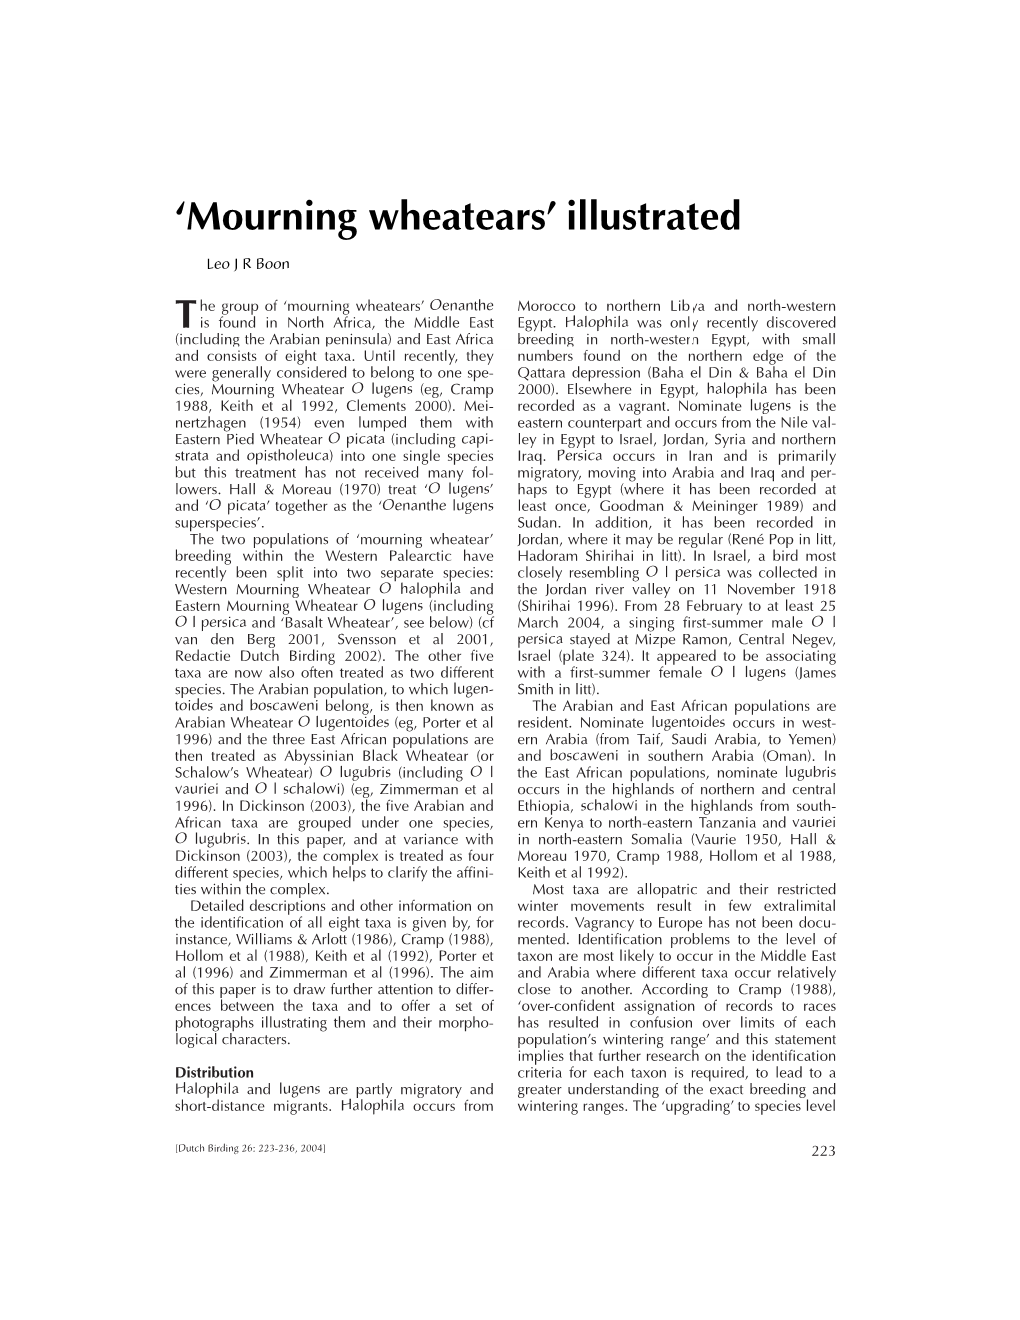 Mourning Wheatears’ Illustrated